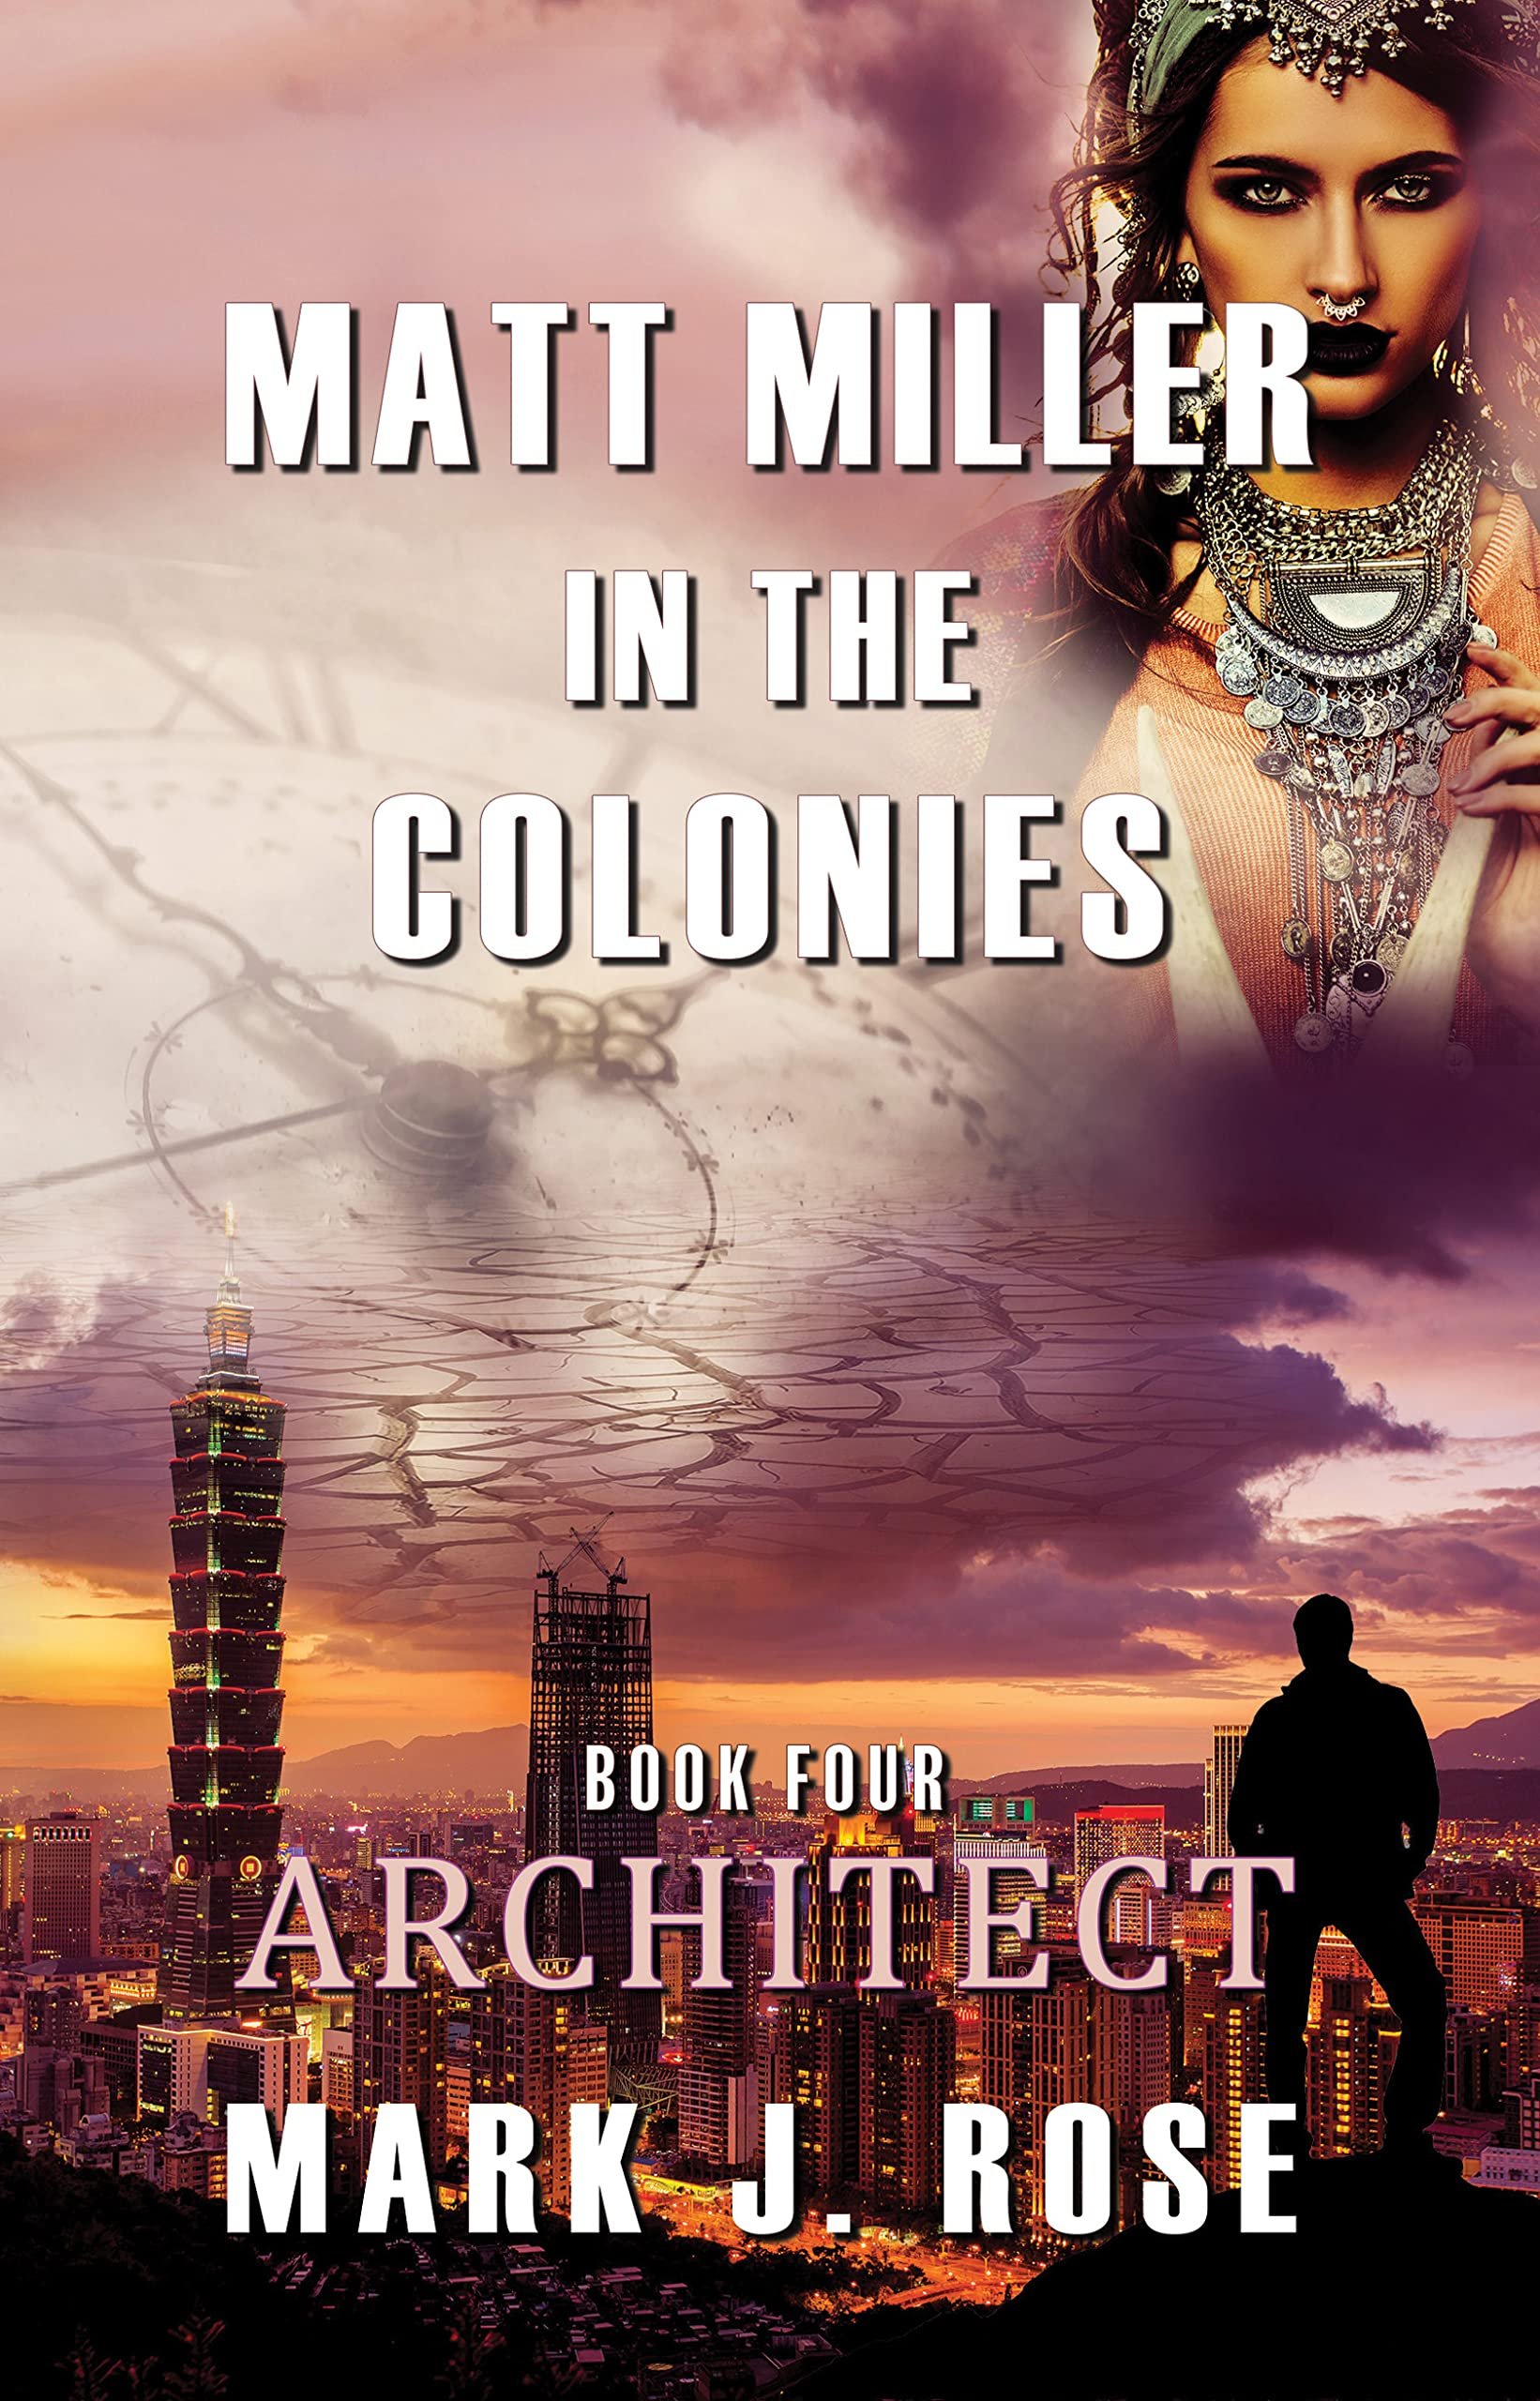 Matt Miller in the Colonies: Book Four: Architect Cover